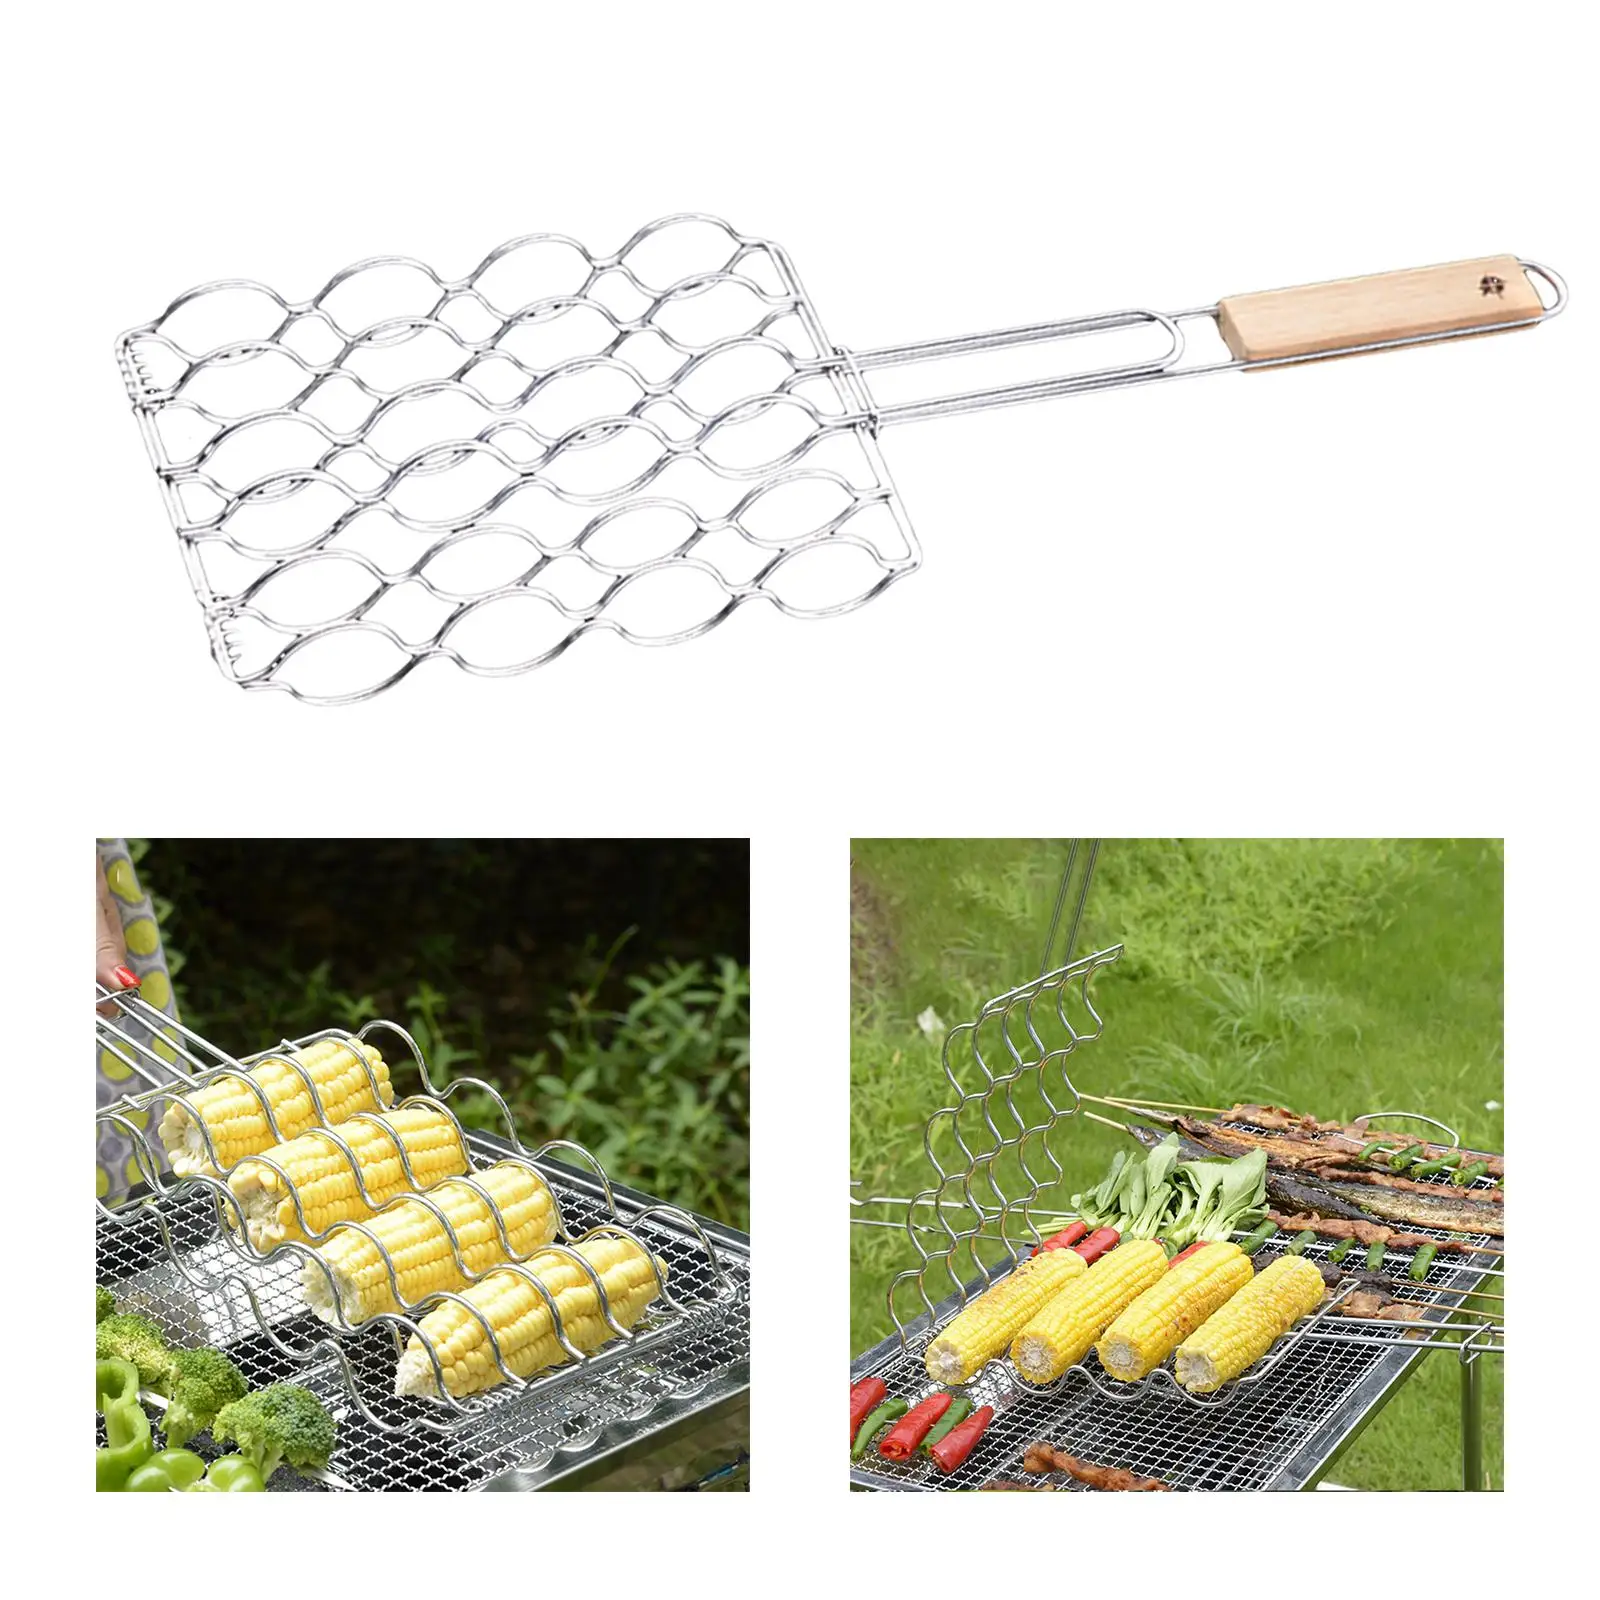 Hot Dog Rack Barbecue Grill Basket Tools ,57x18x5cm for Grill, Ovens Cooking Accessories Comfortable Grip Premium Materials